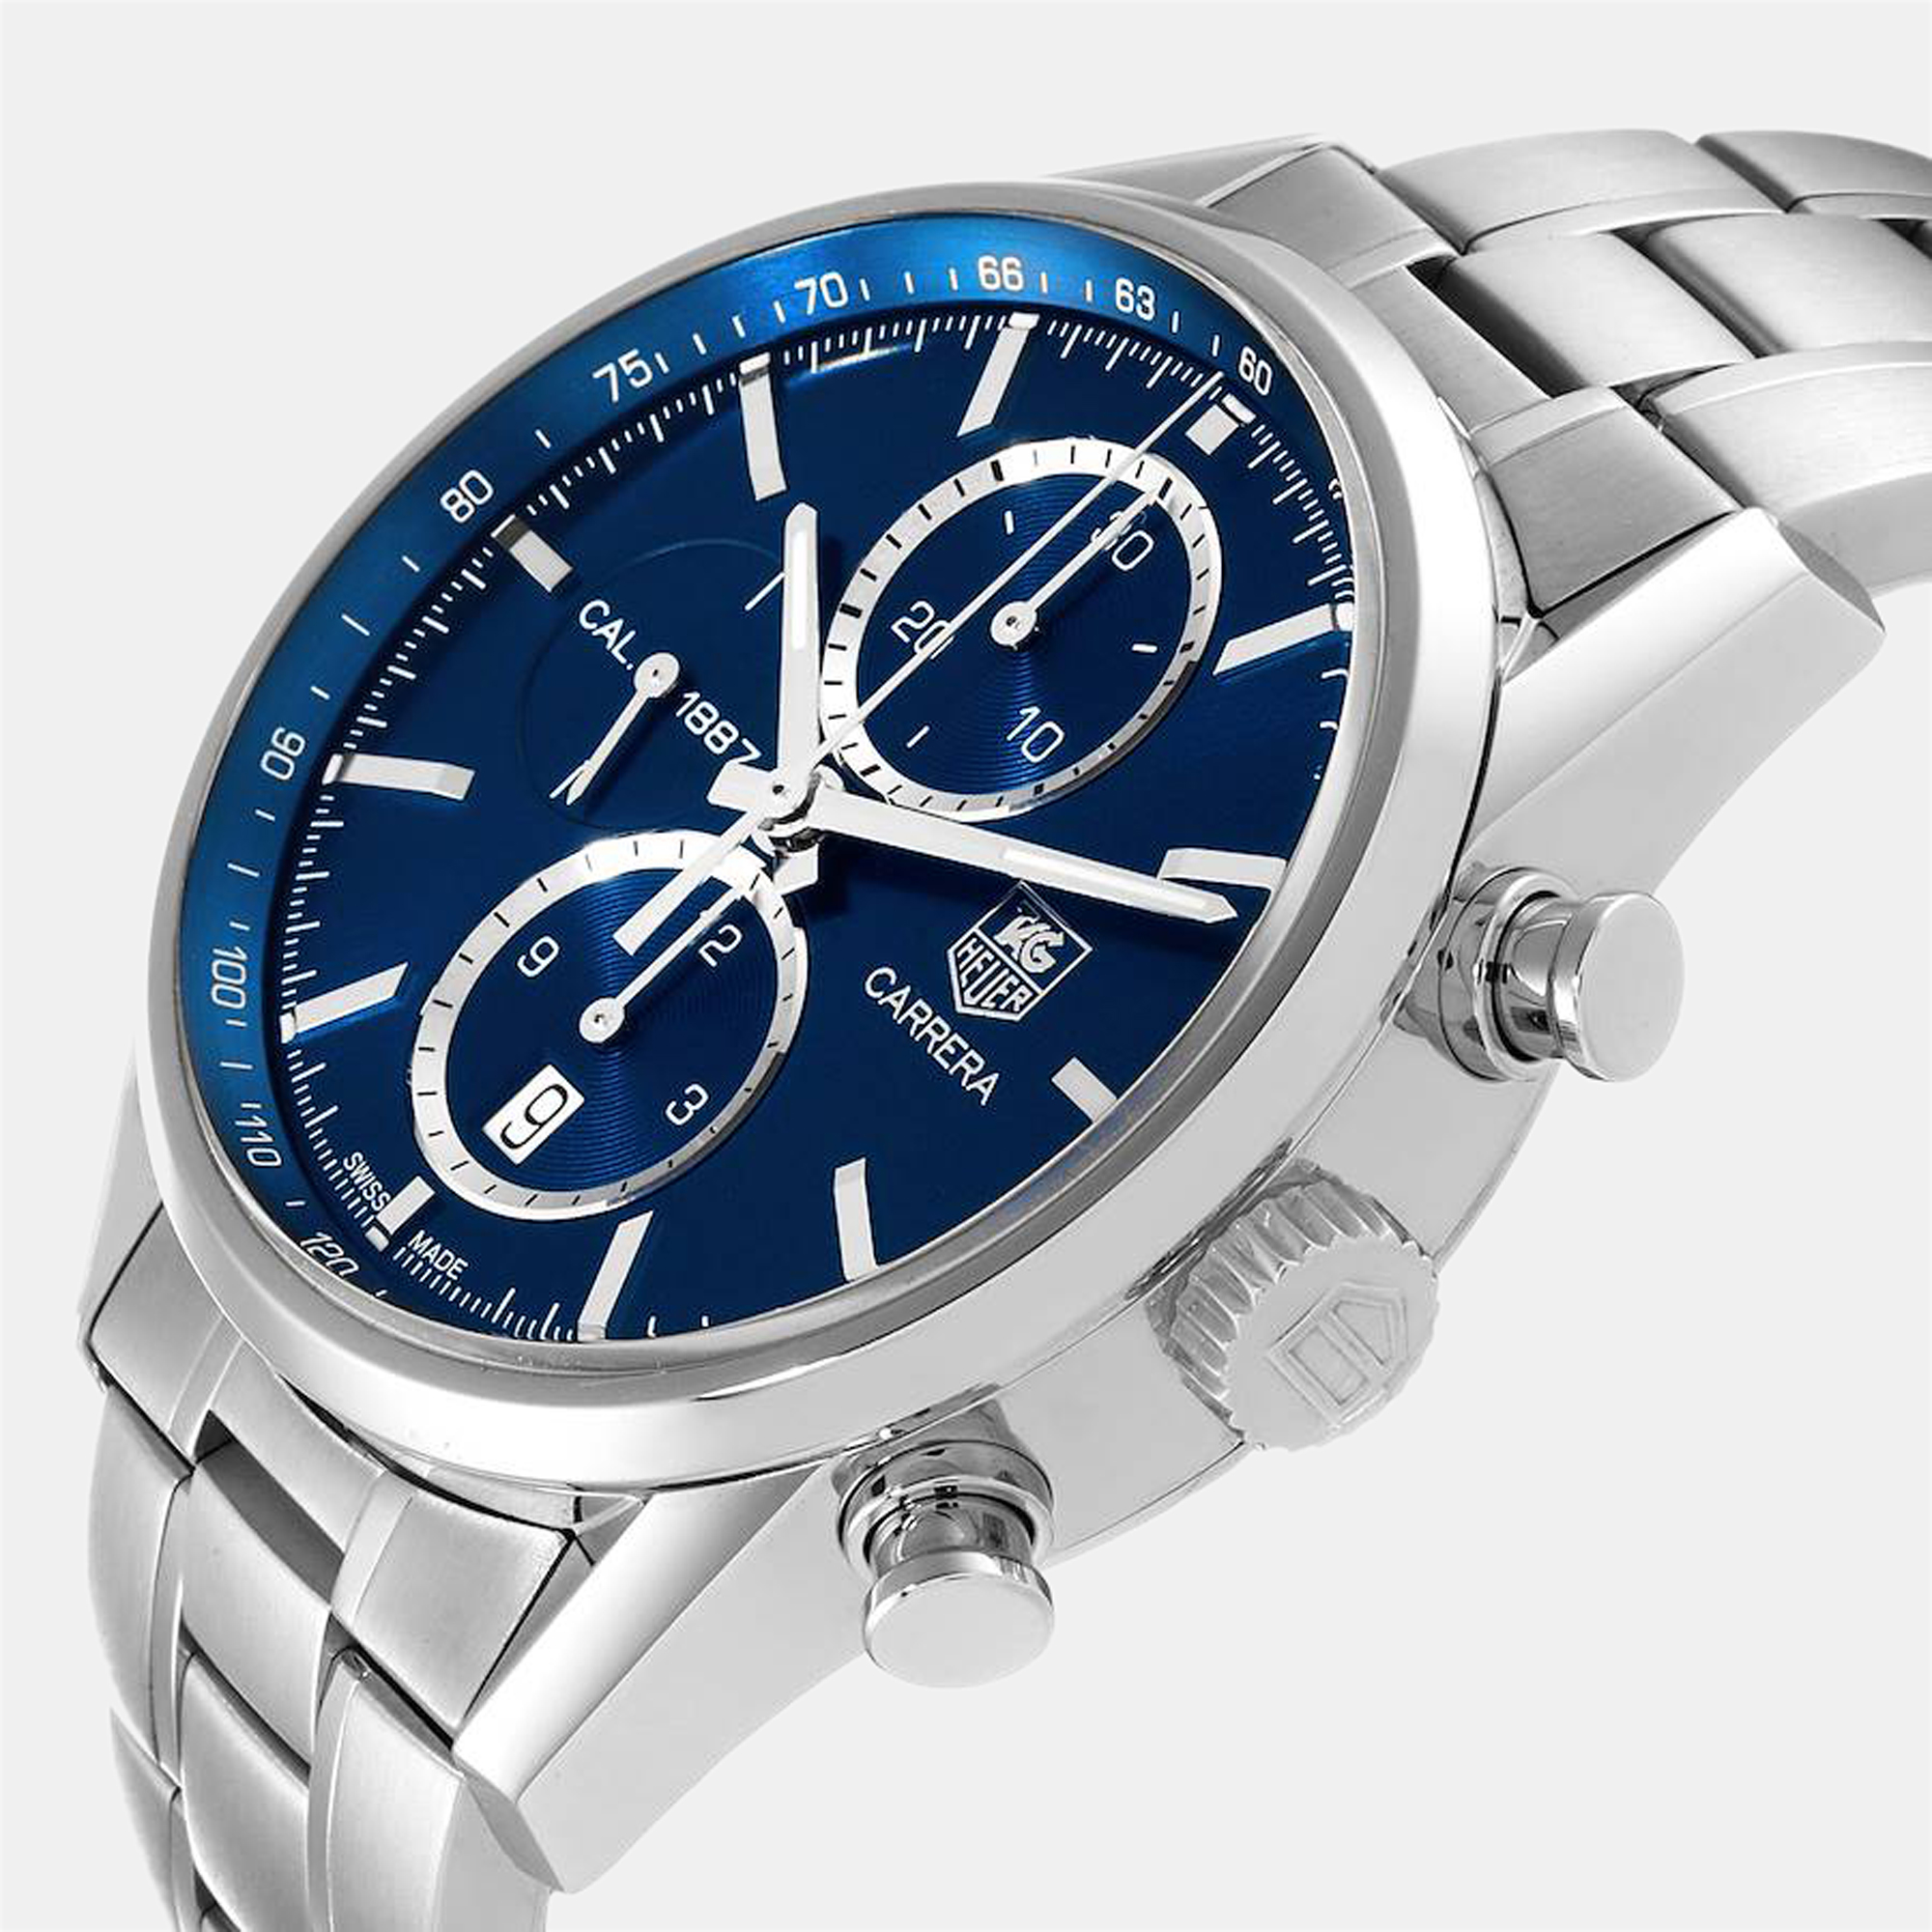 

Tag Heuer Blue Stainless Steel Carrera Calibre 1887 CAR2115 Automatic Men's Wristwatch 41 mm